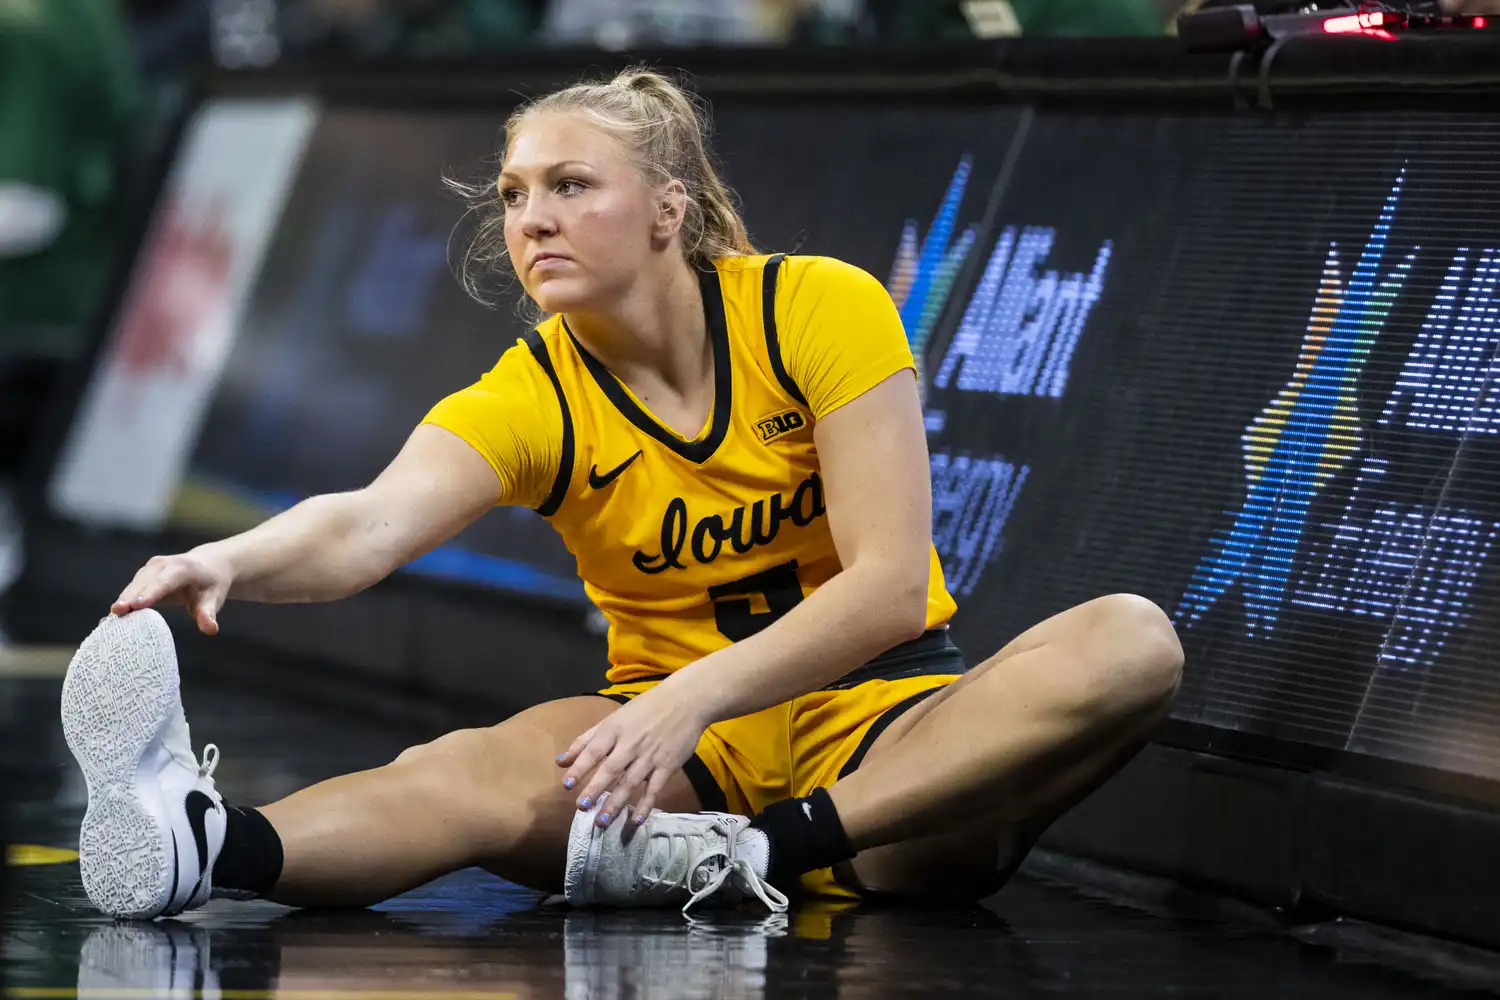 Chicago Toughness: Guard Sydney Affolter brings unmatched energy to Iowa women's basketball squad